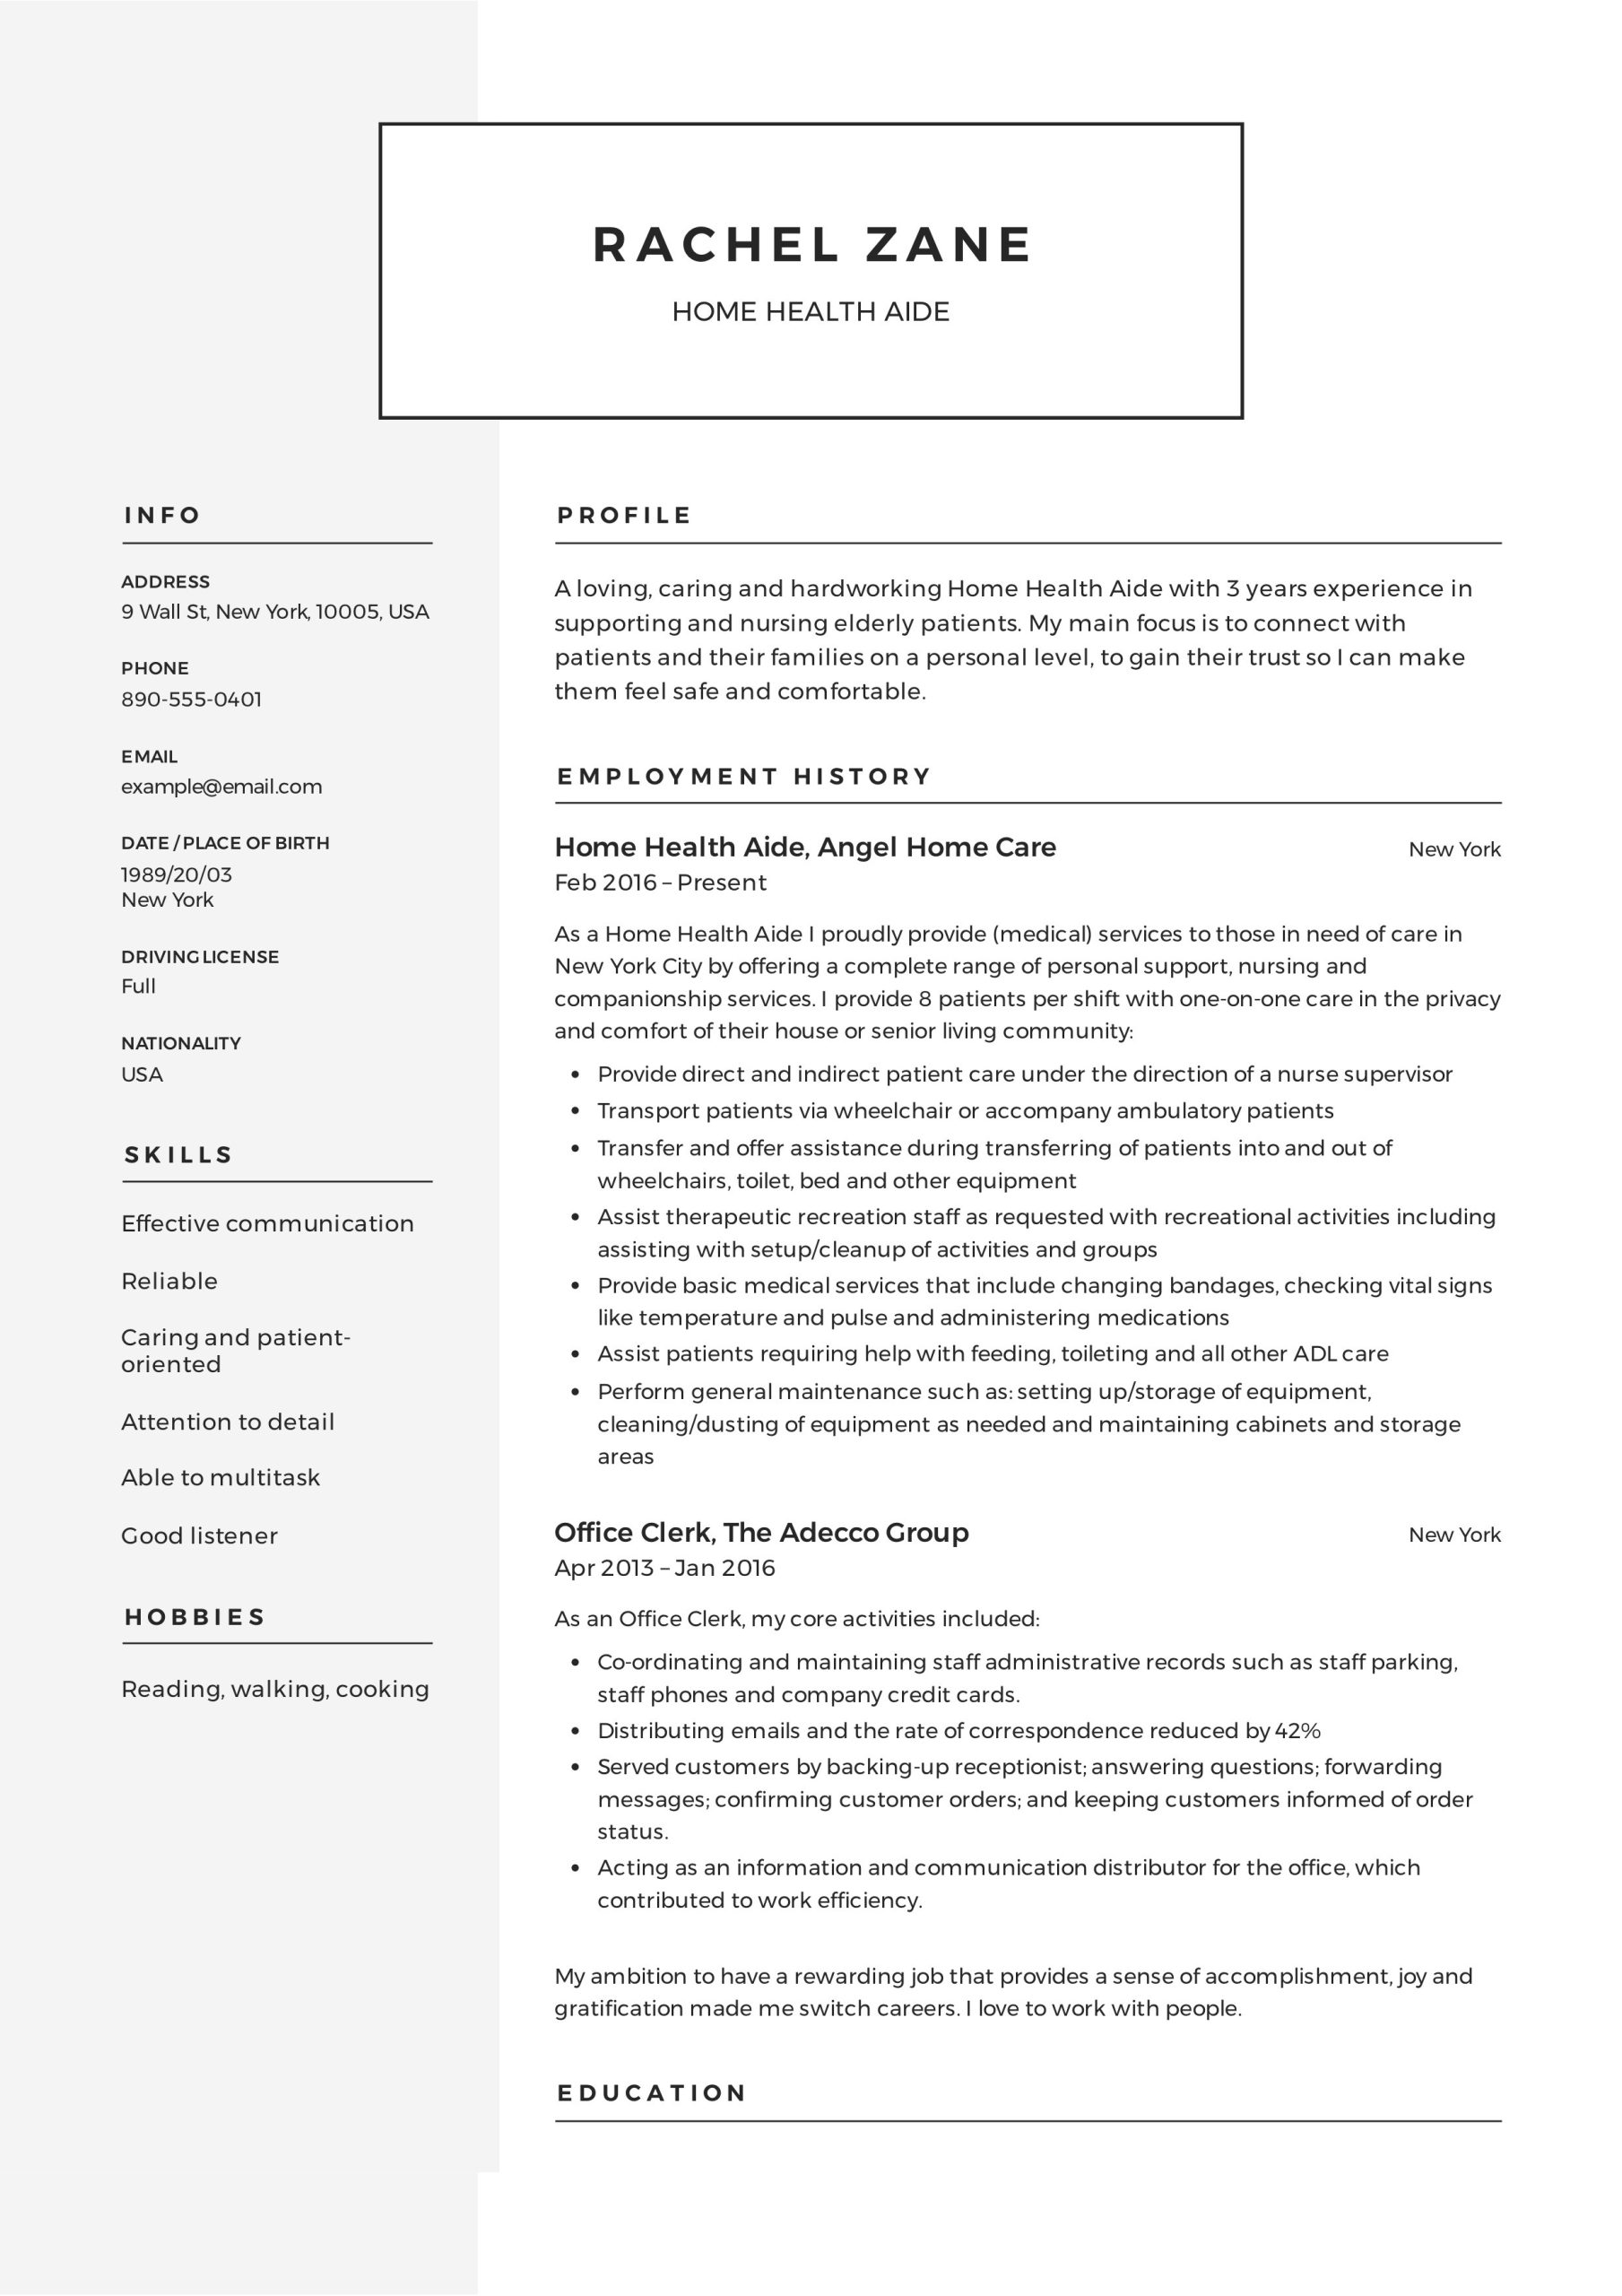 Home Health Care Rn Resume Sample Home Health Aide Resume Guide 12 Examples Pdf